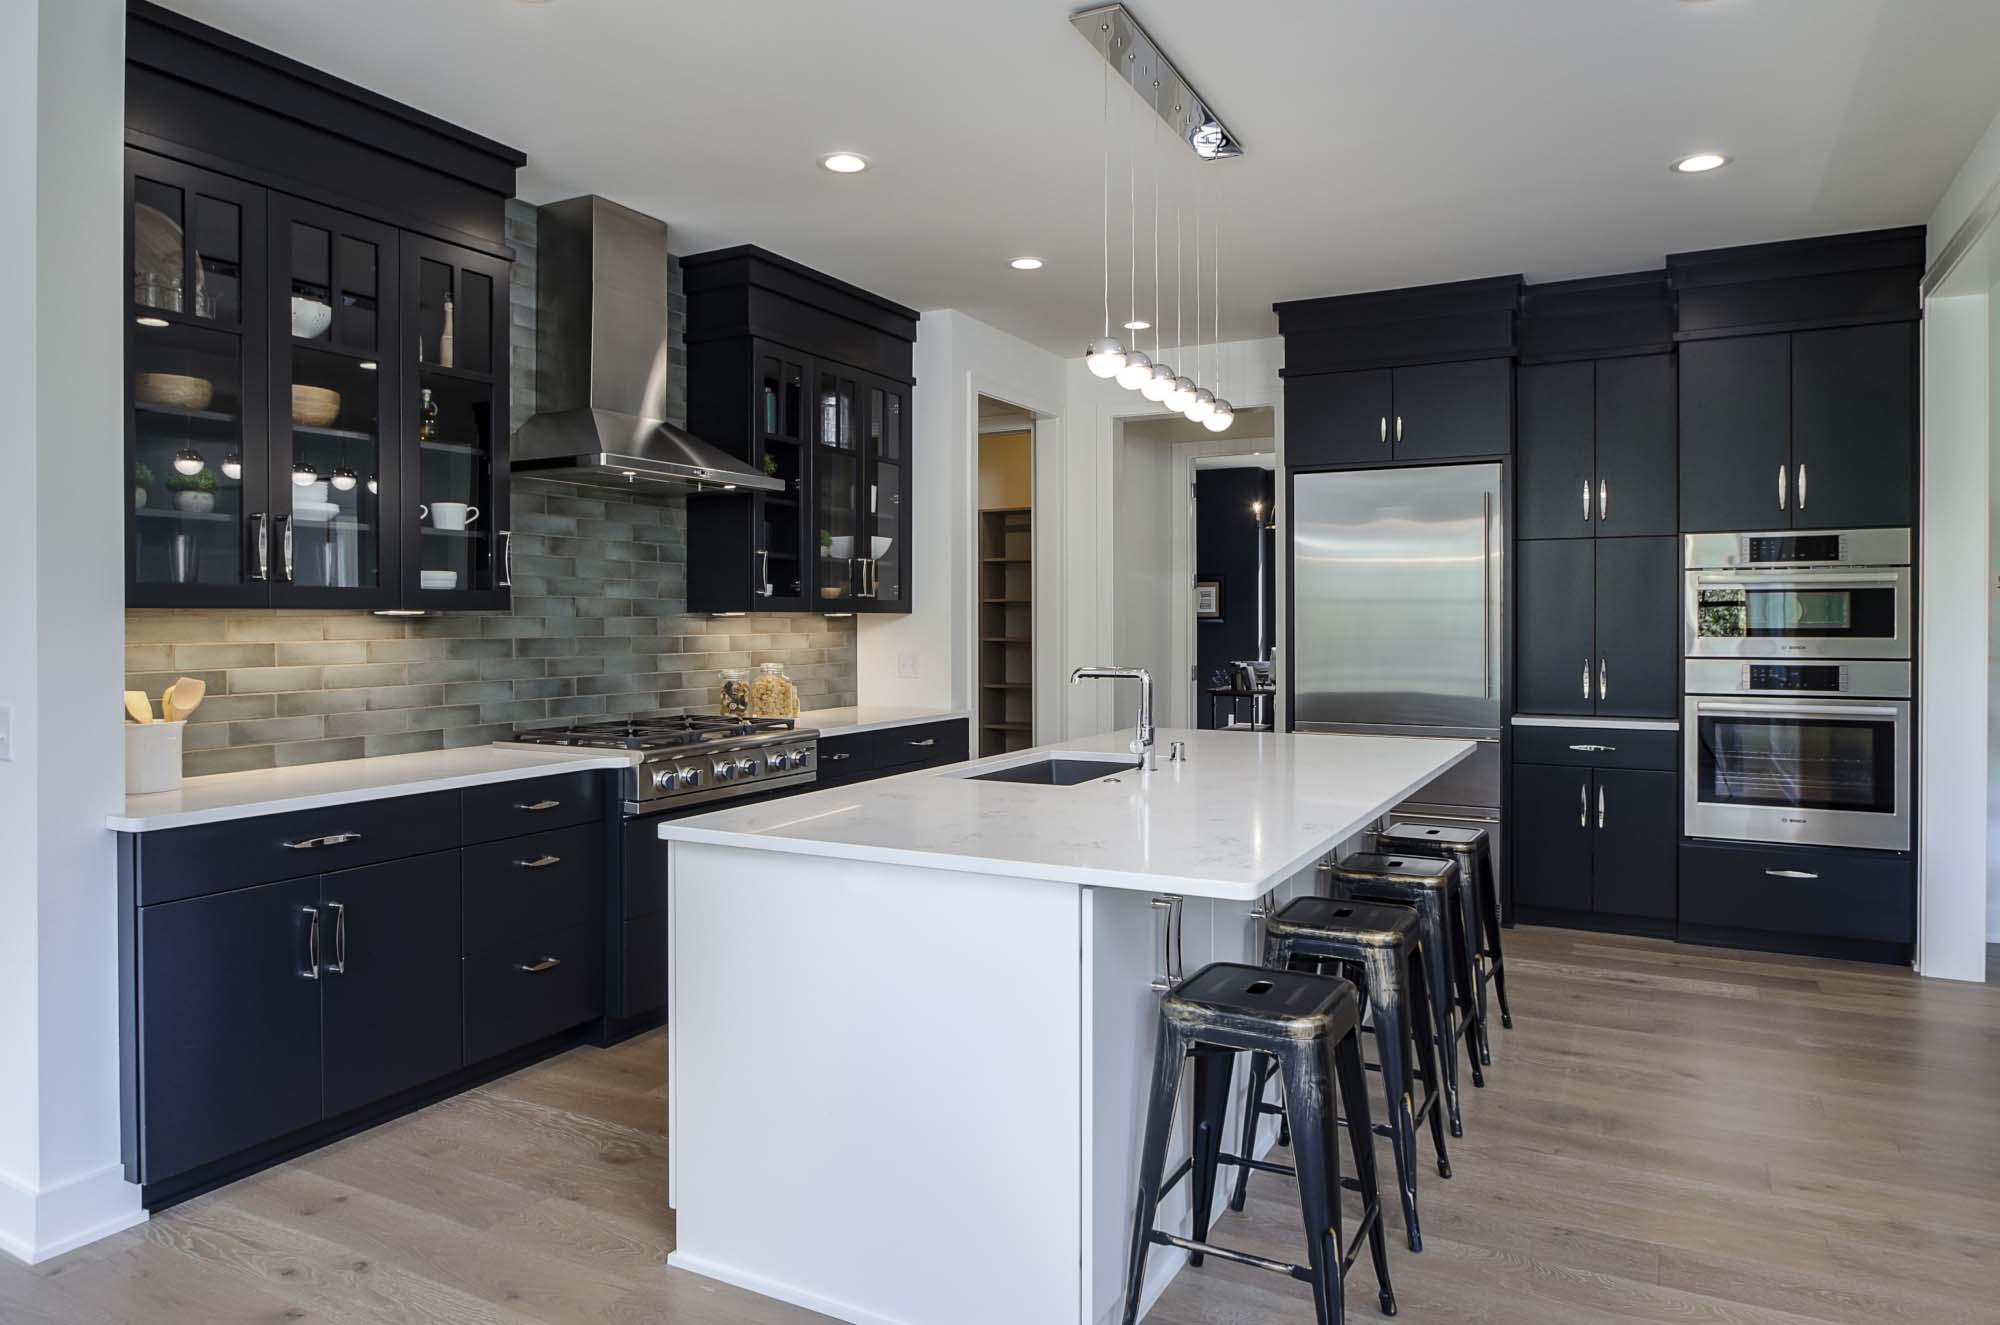 A modern kitchen with black cabinets and a center island.